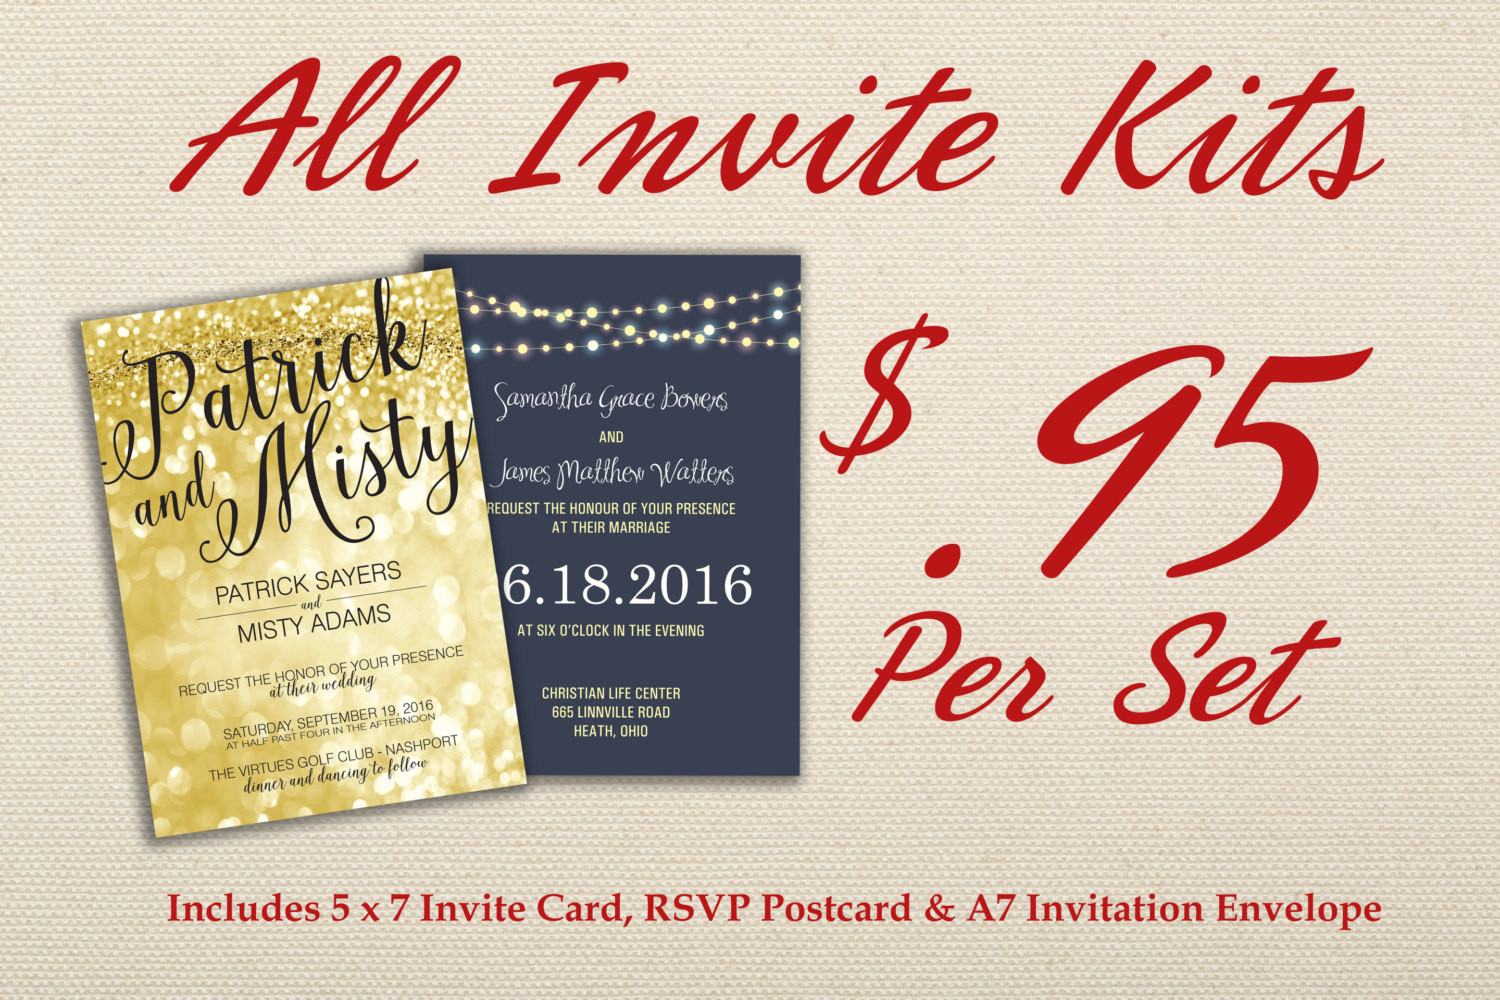 Wedding Invitations Inexpensive
 Wedding Invitation Kit Printed with RSVP Affordable Cheap